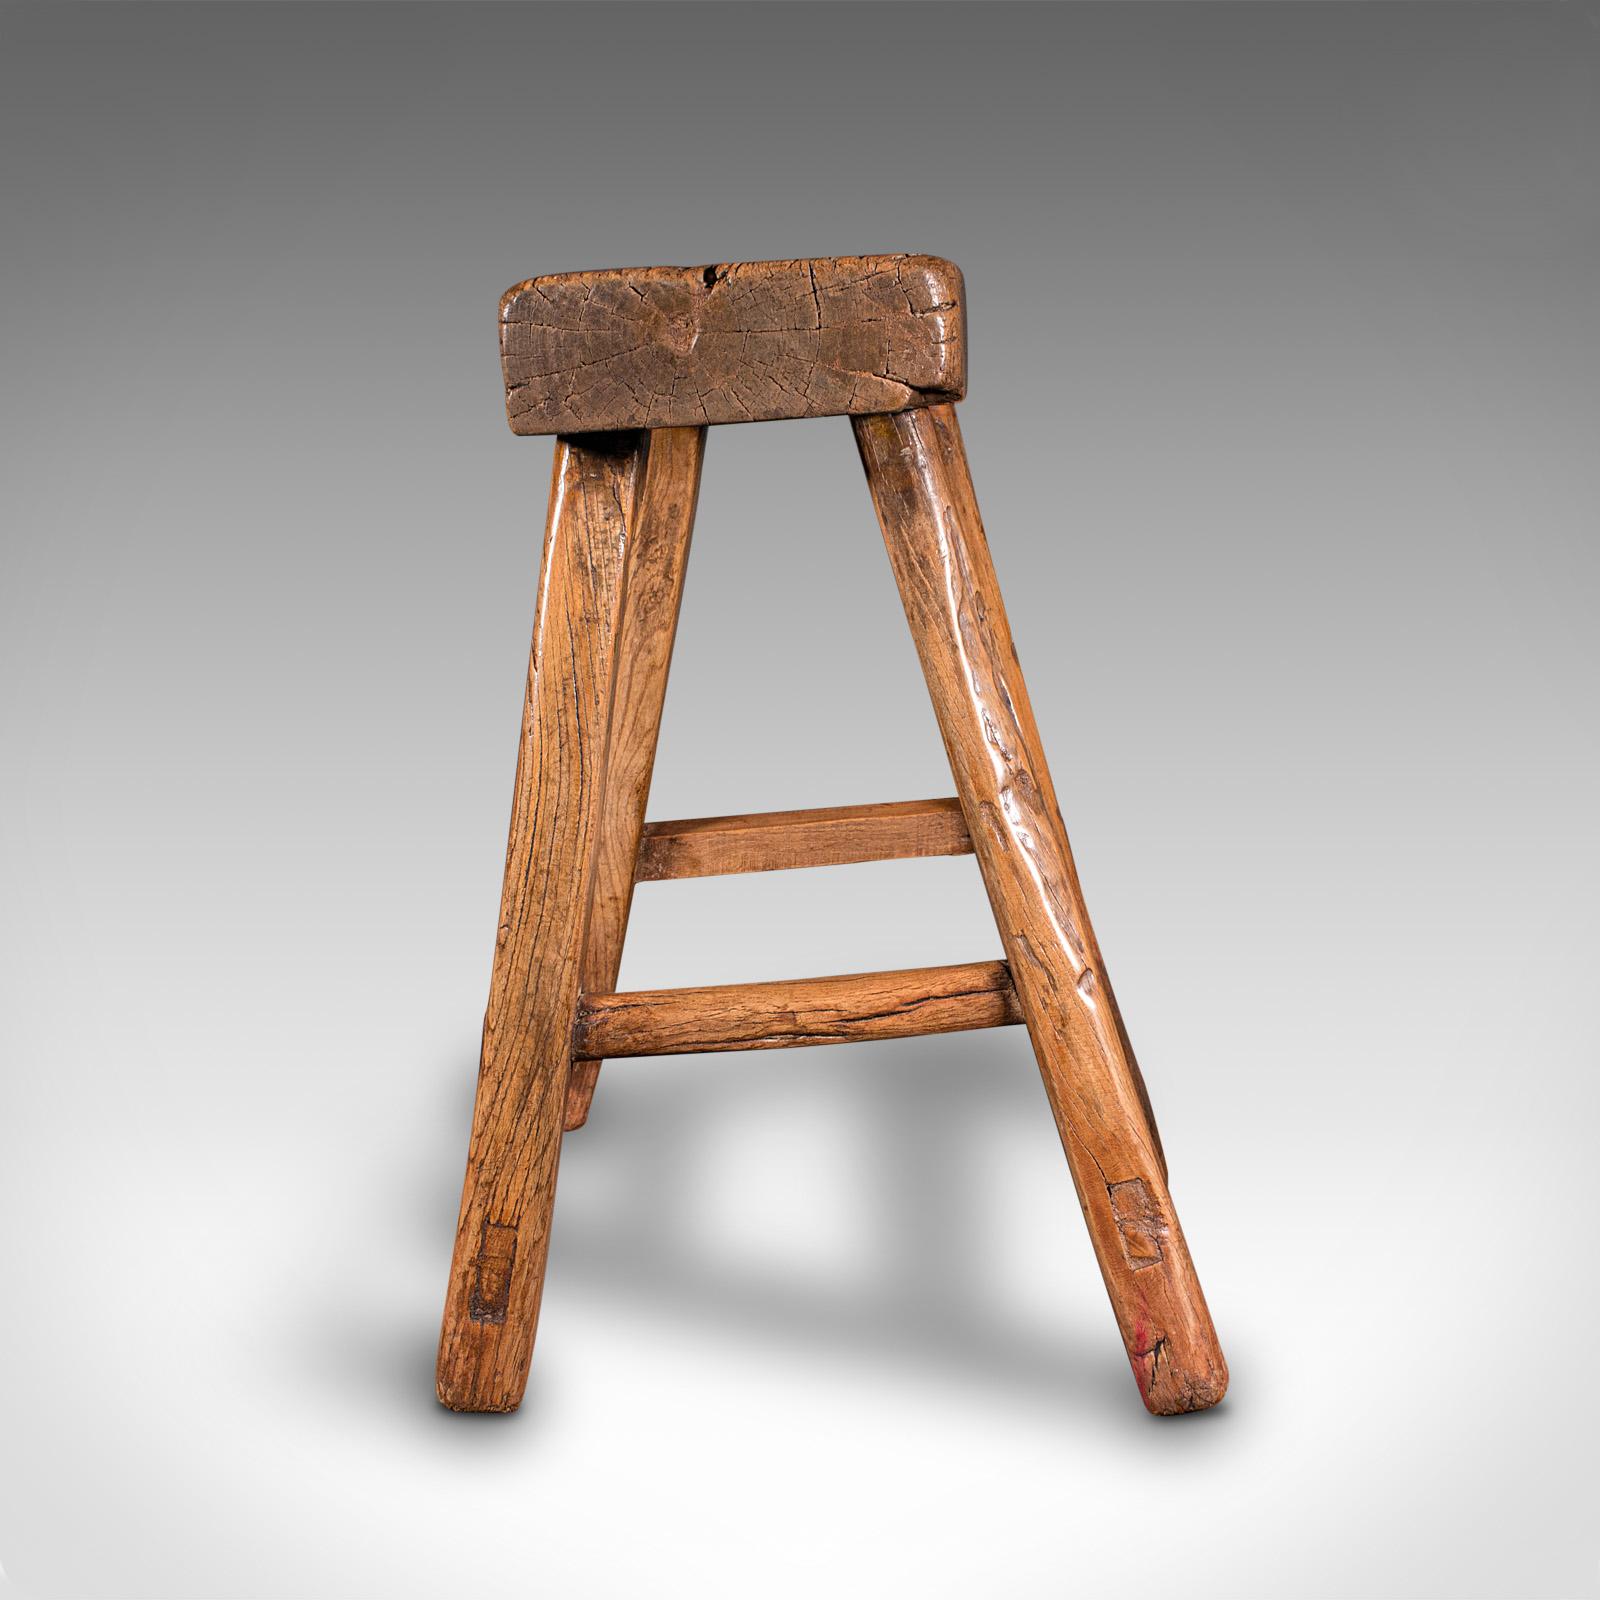 Small Antique Craftsman's Stool, English, Oak, Provincial, Georgian, Circa 1800 In Good Condition For Sale In Hele, Devon, GB